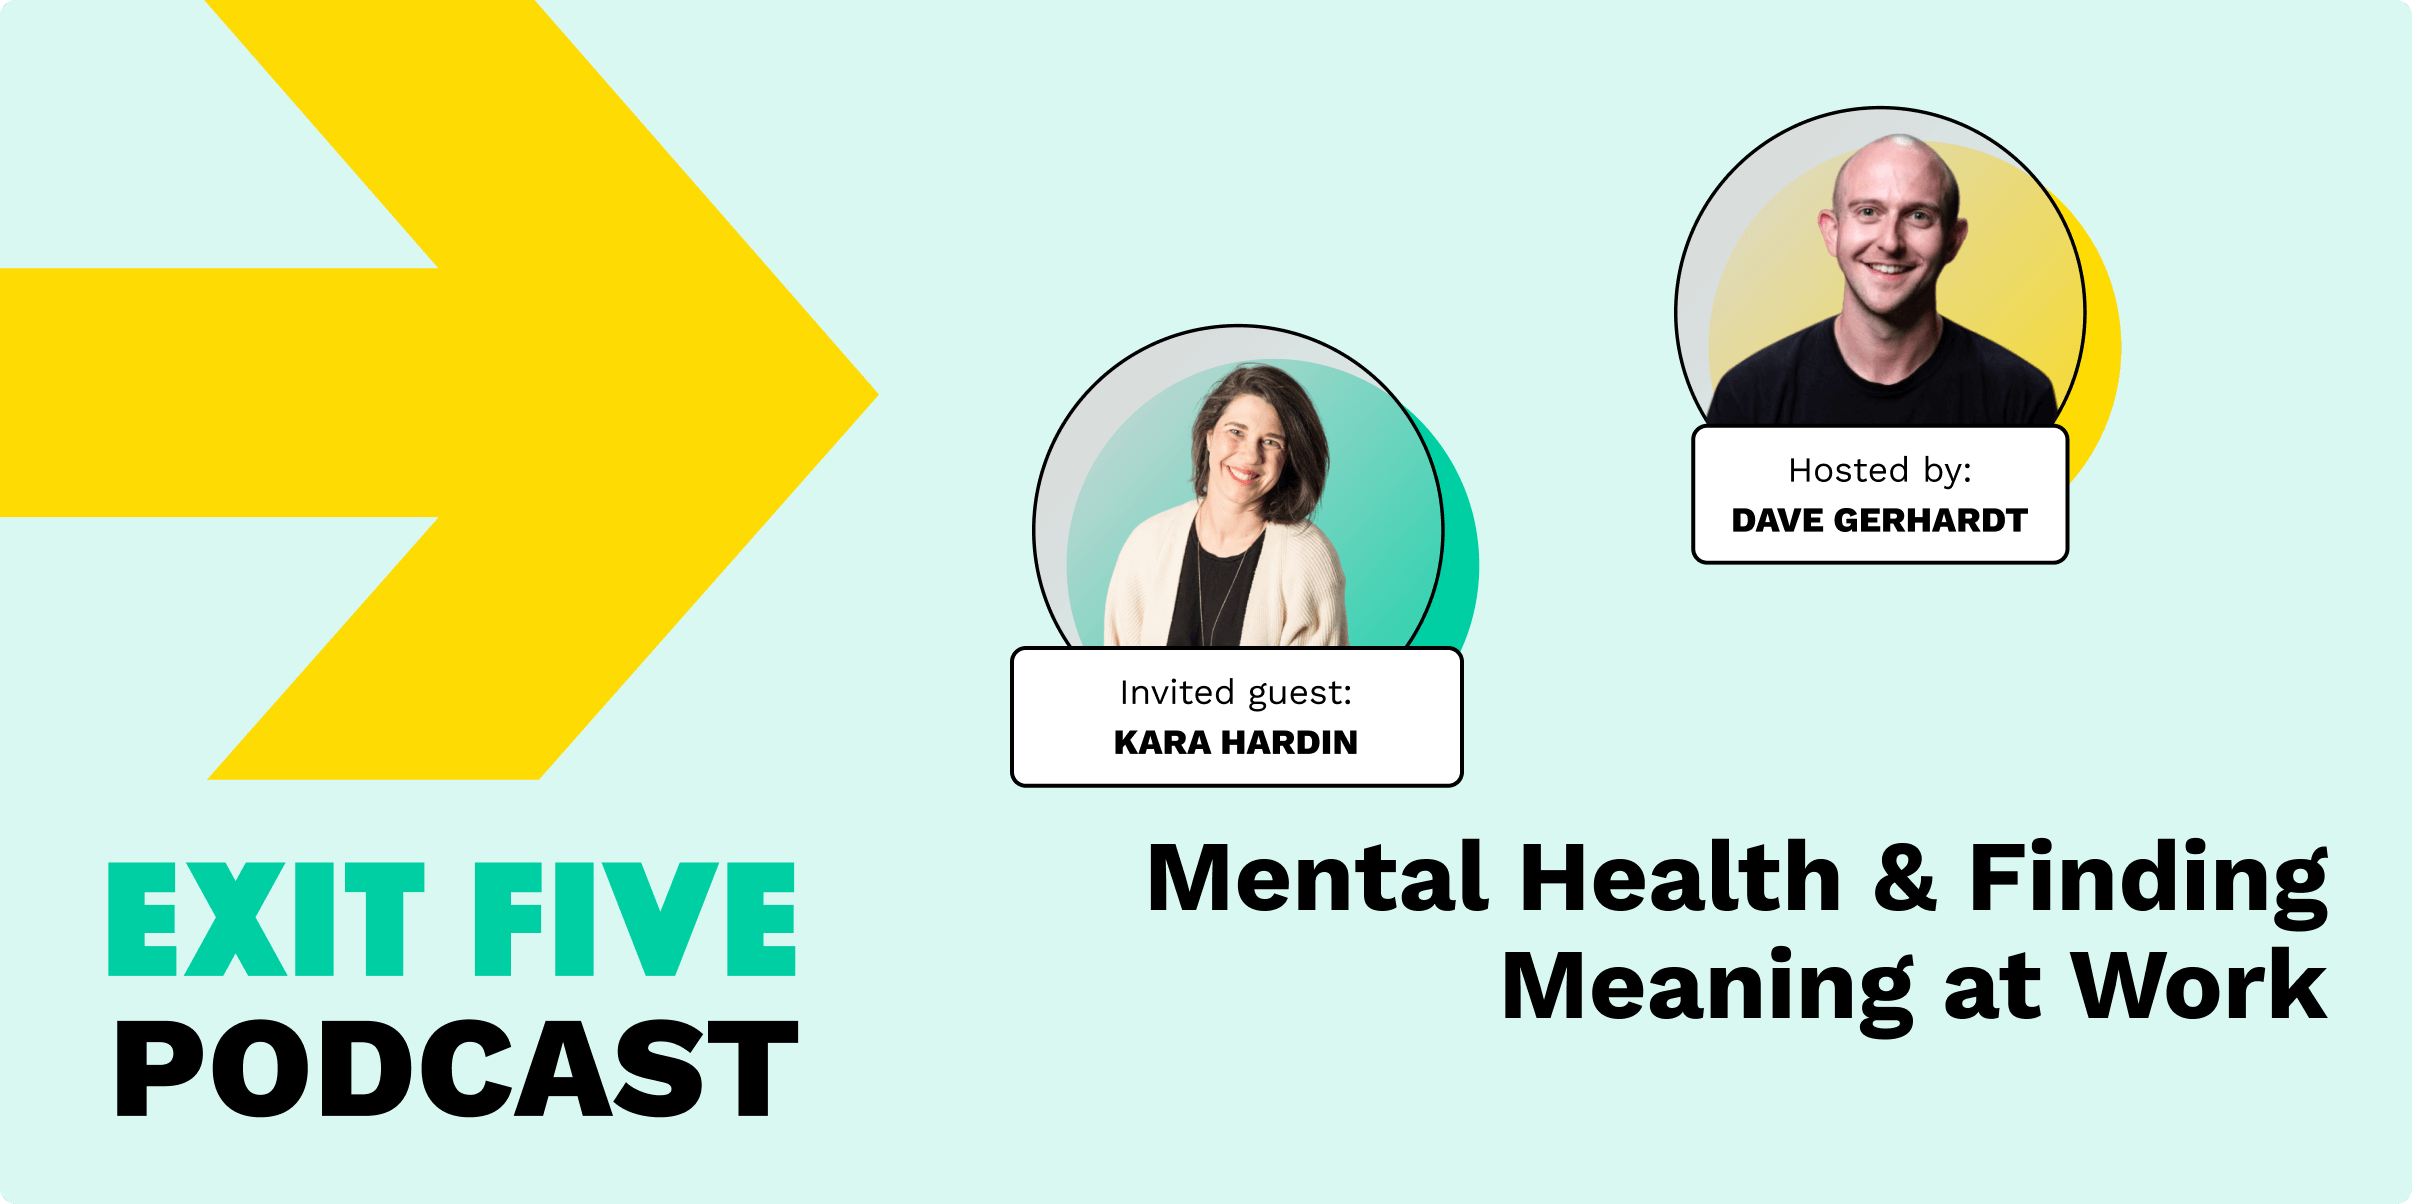 Mental Health & Finding Meaning at Work